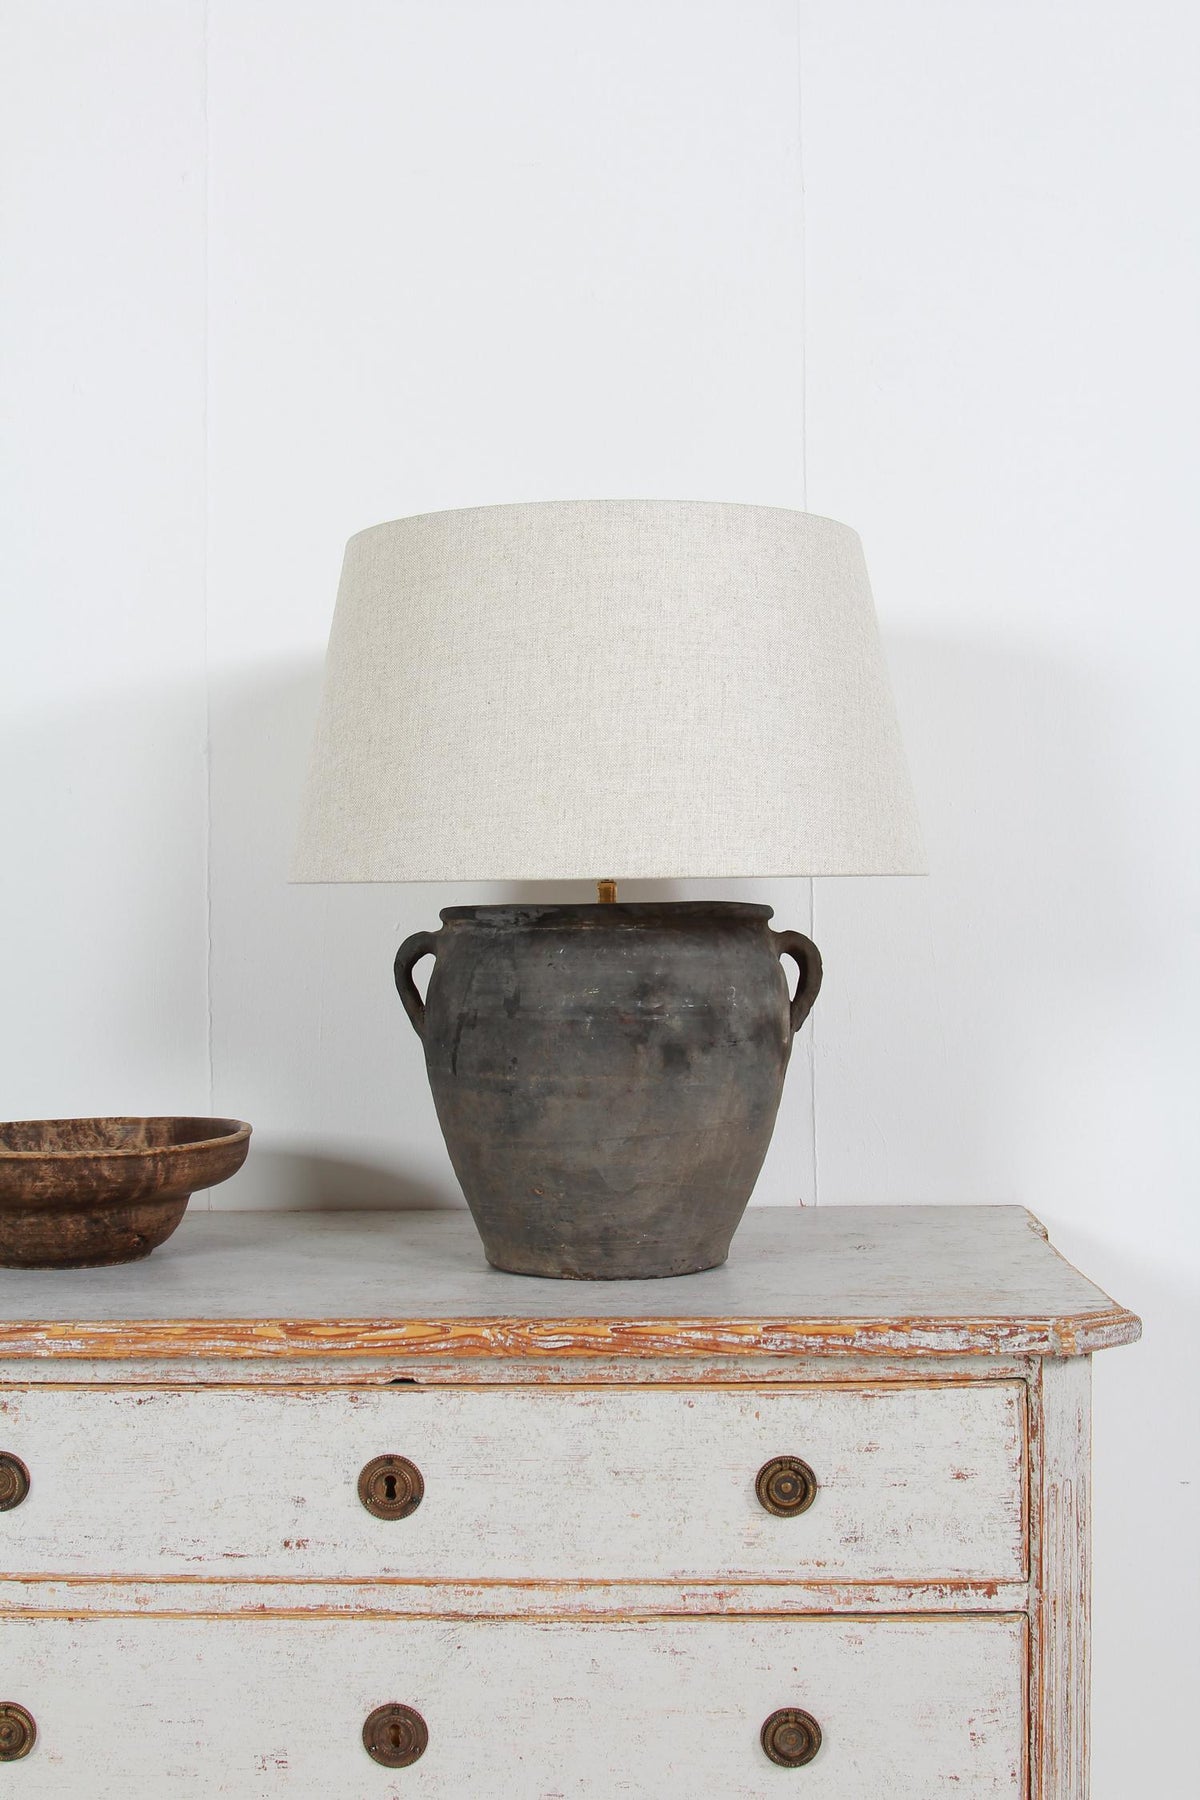 AUTHENTIC CHINESE TERRACOTTA POTTERY LAMP WITH NATURAL LINEN SHADE